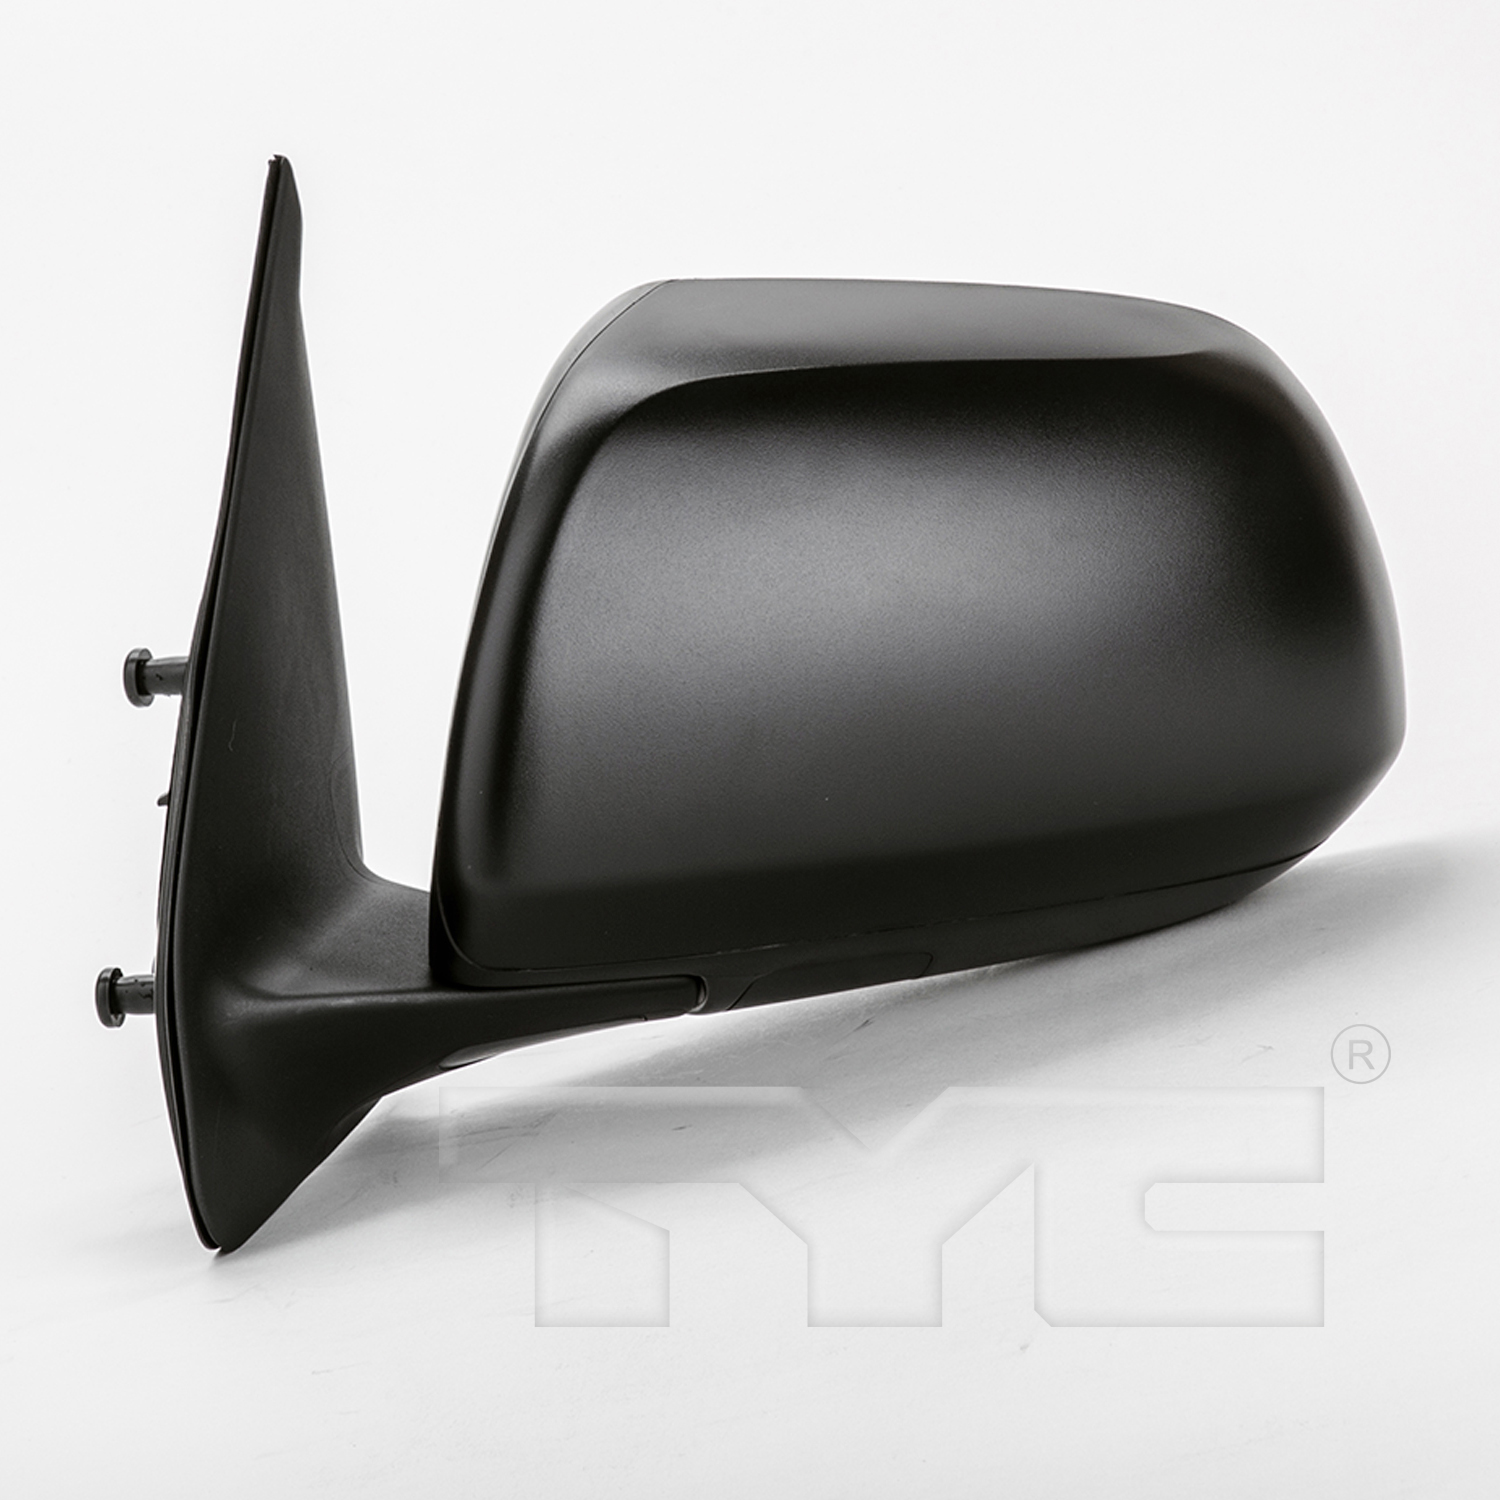 Aftermarket MIRRORS for TOYOTA - TACOMA, TACOMA,12-15,LT Mirror outside rear view